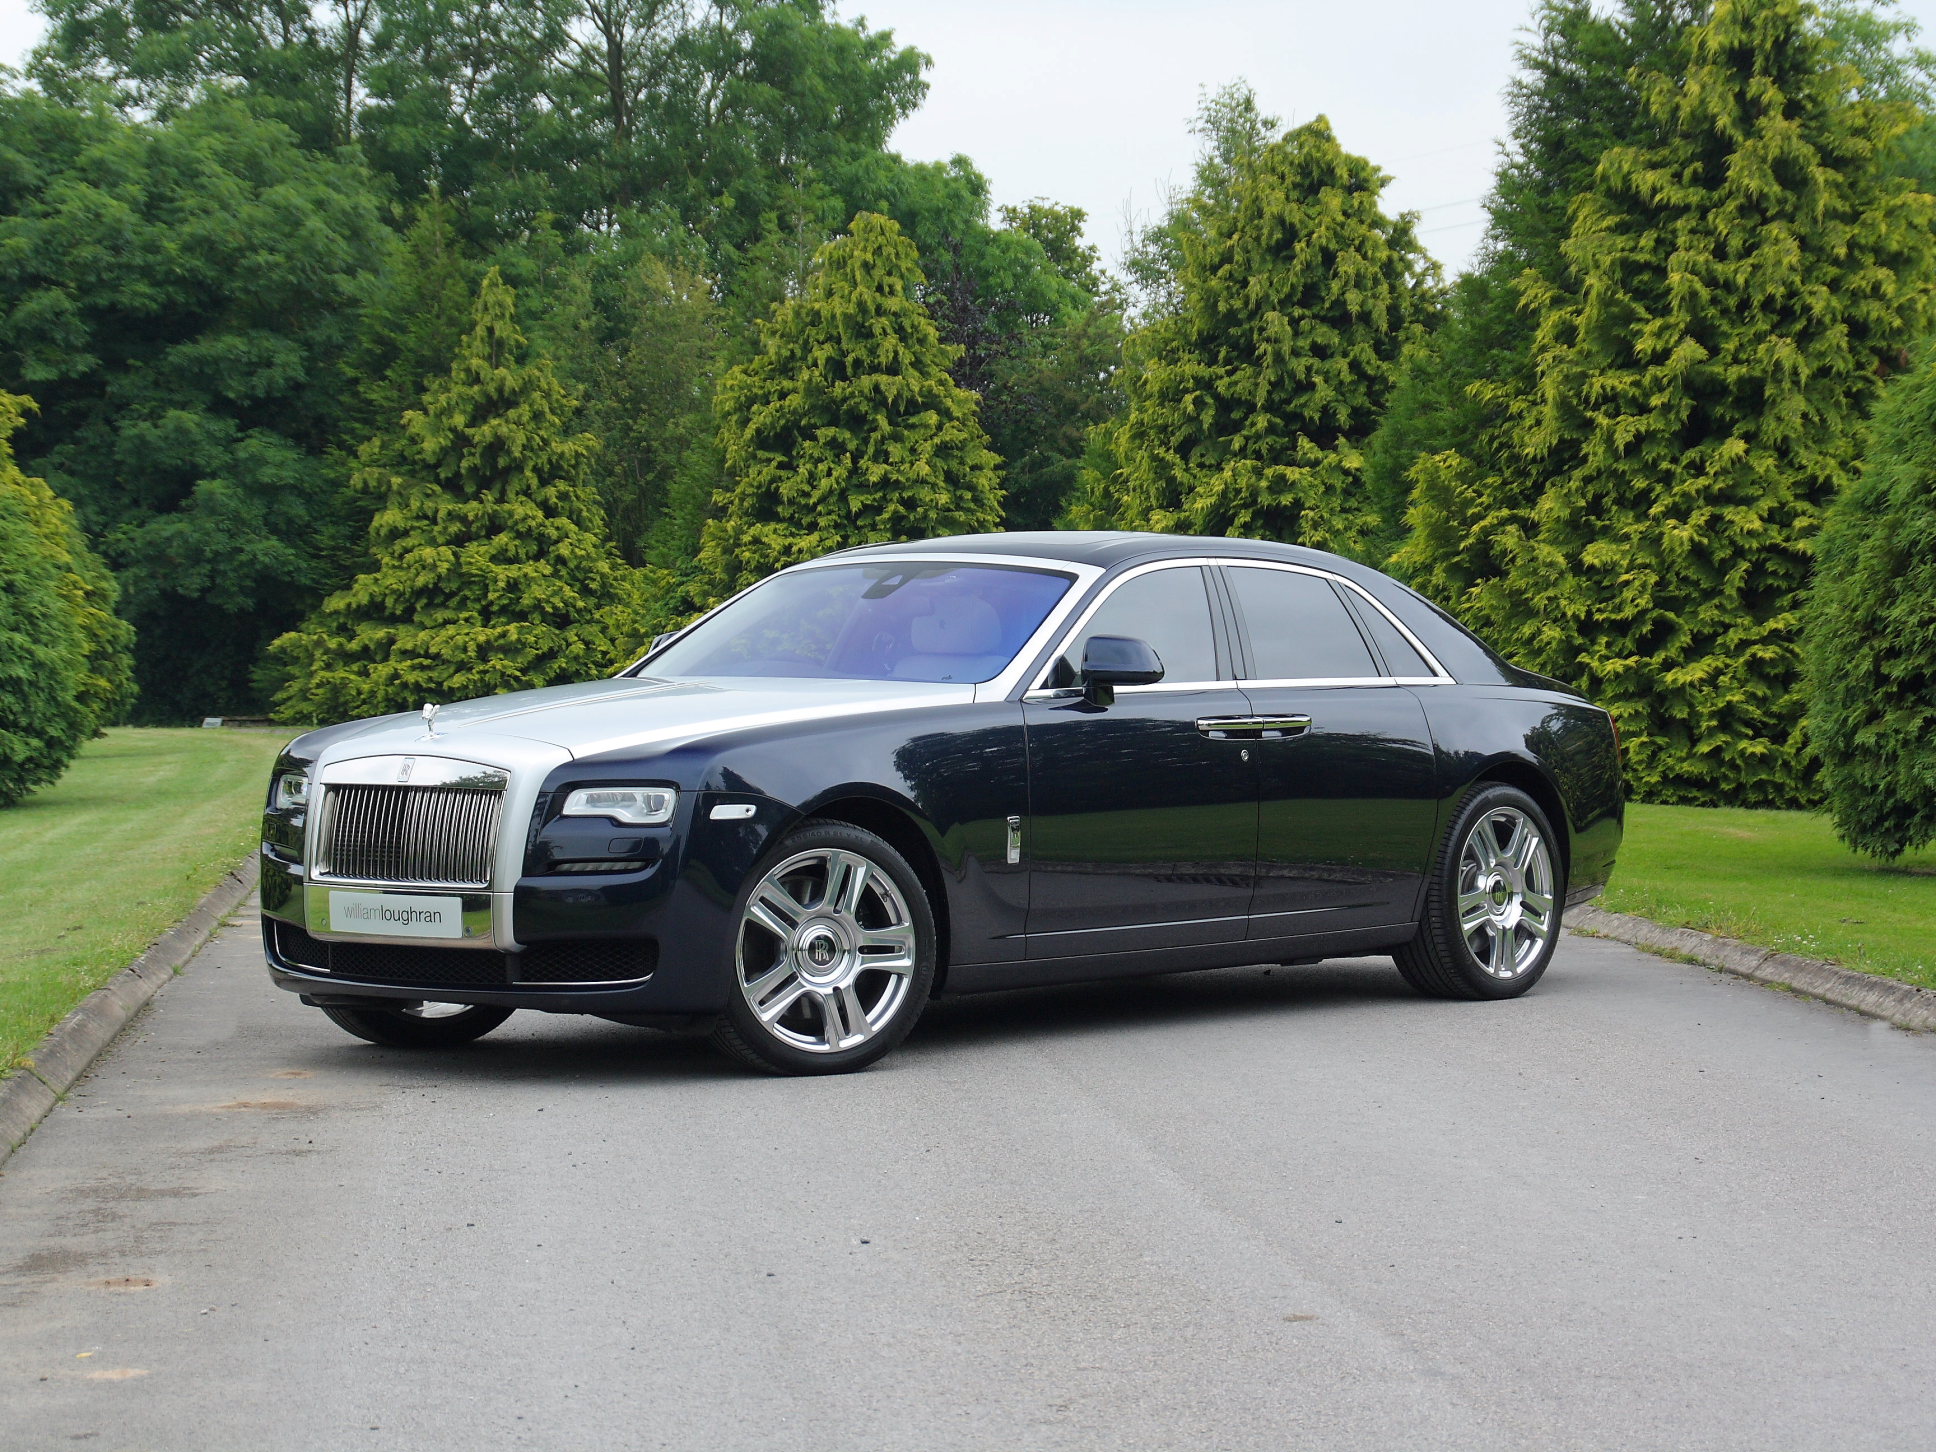 Heres why the RollsRoyce Ghost is the best luxury car on sale  Top Gear